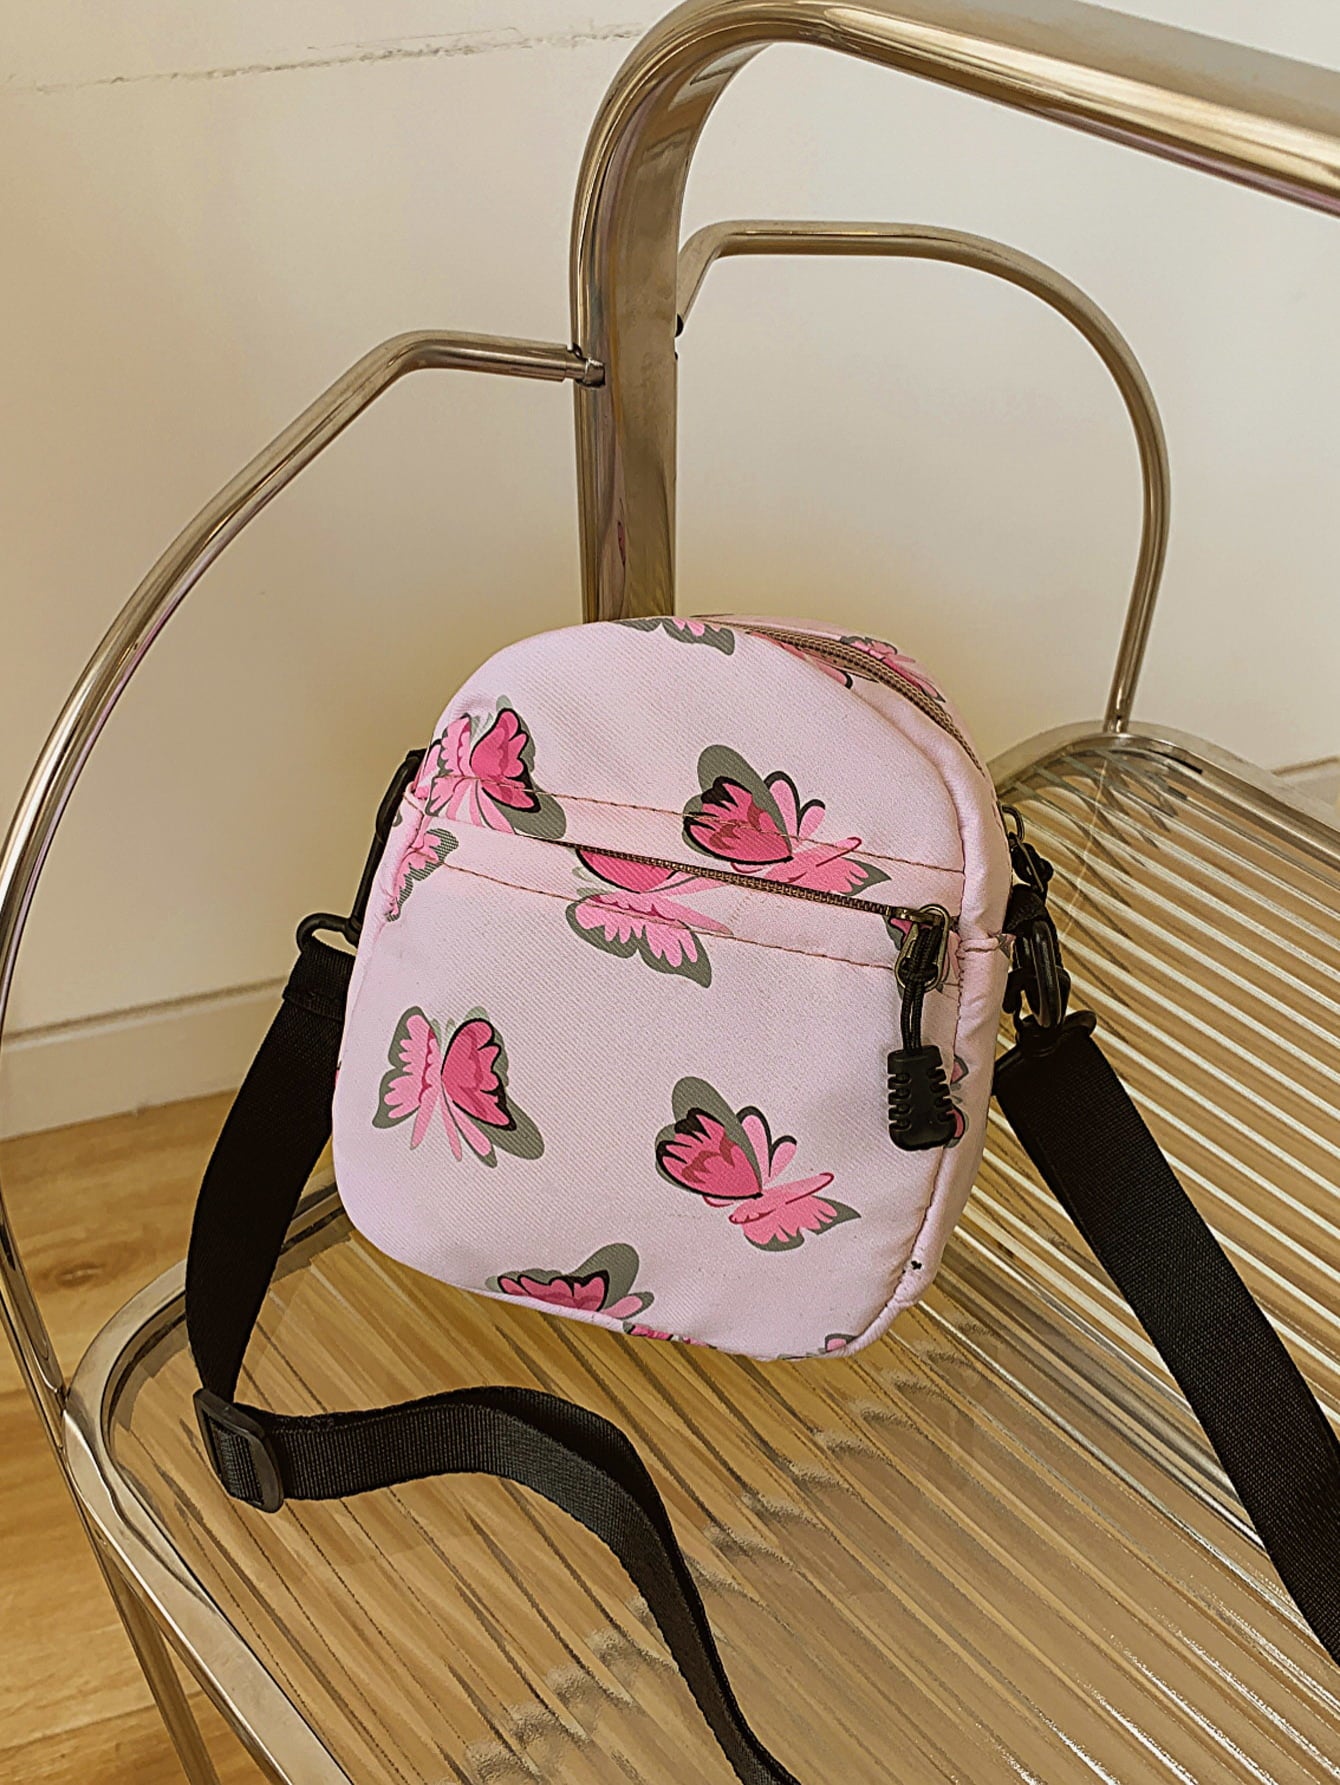 butterfly print polyester shoulder handbag, pink with pink butterflies, on metal slatted chair